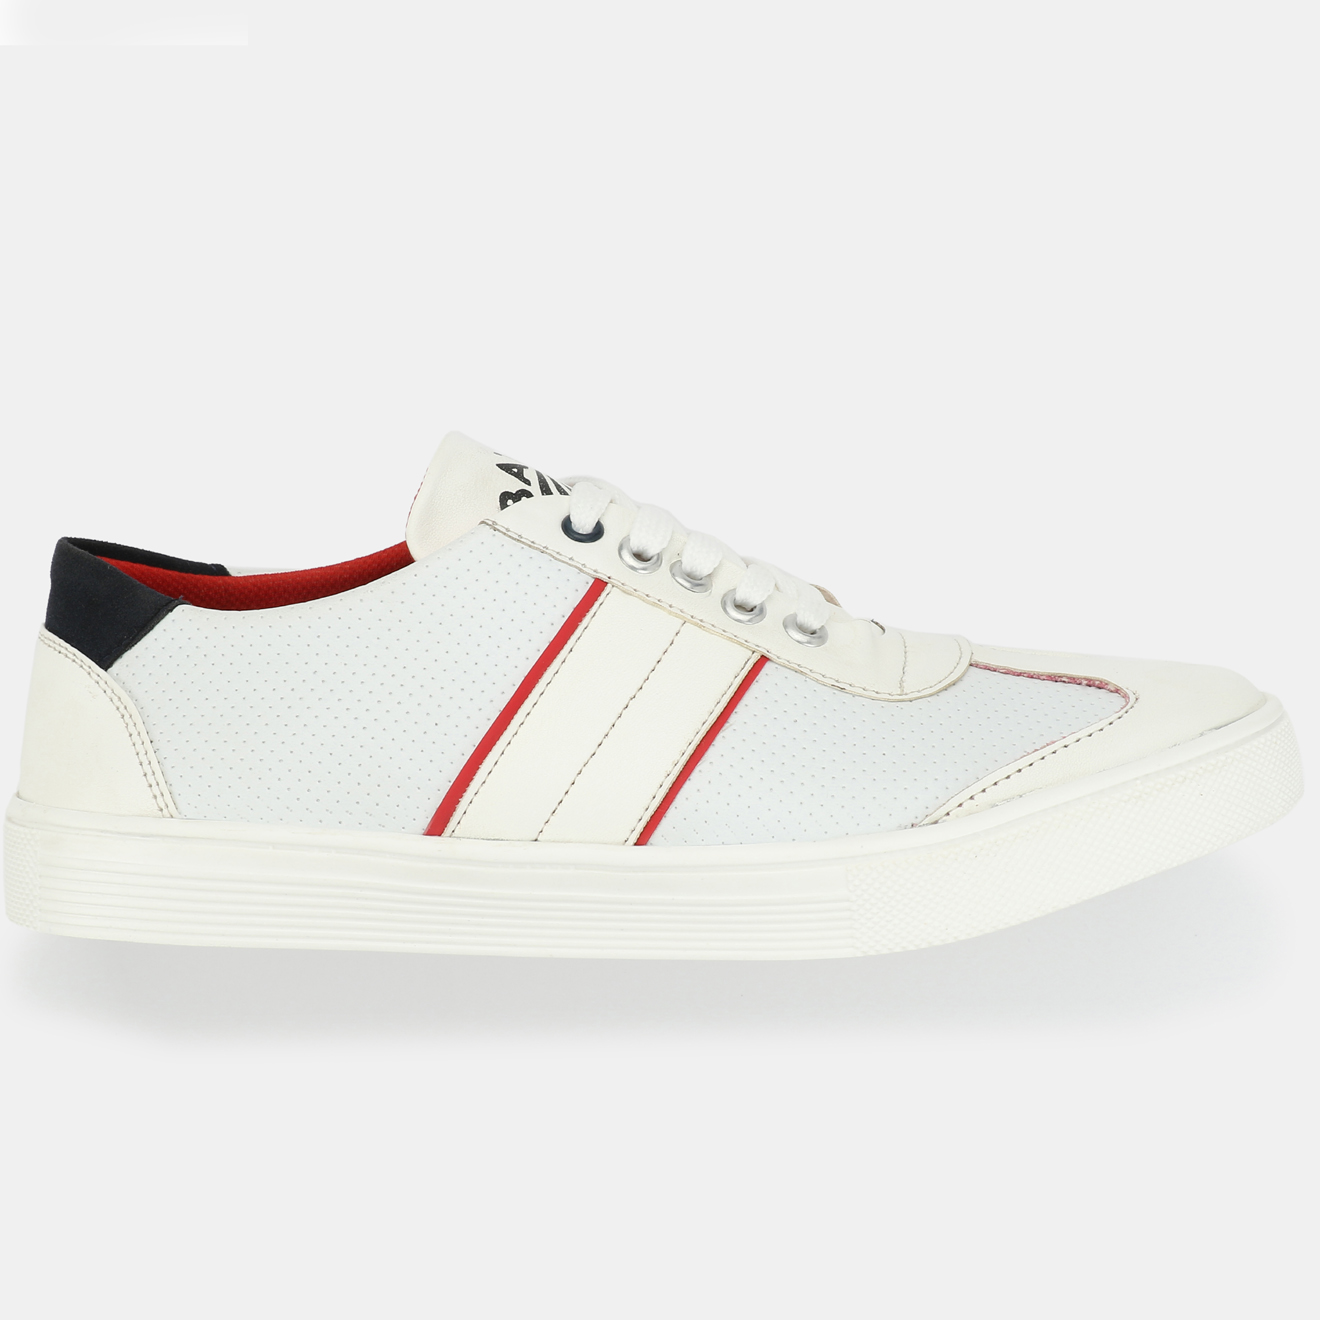 Buy Men's White Lace-up Sneakers Online @ ₹499 from ShopClues